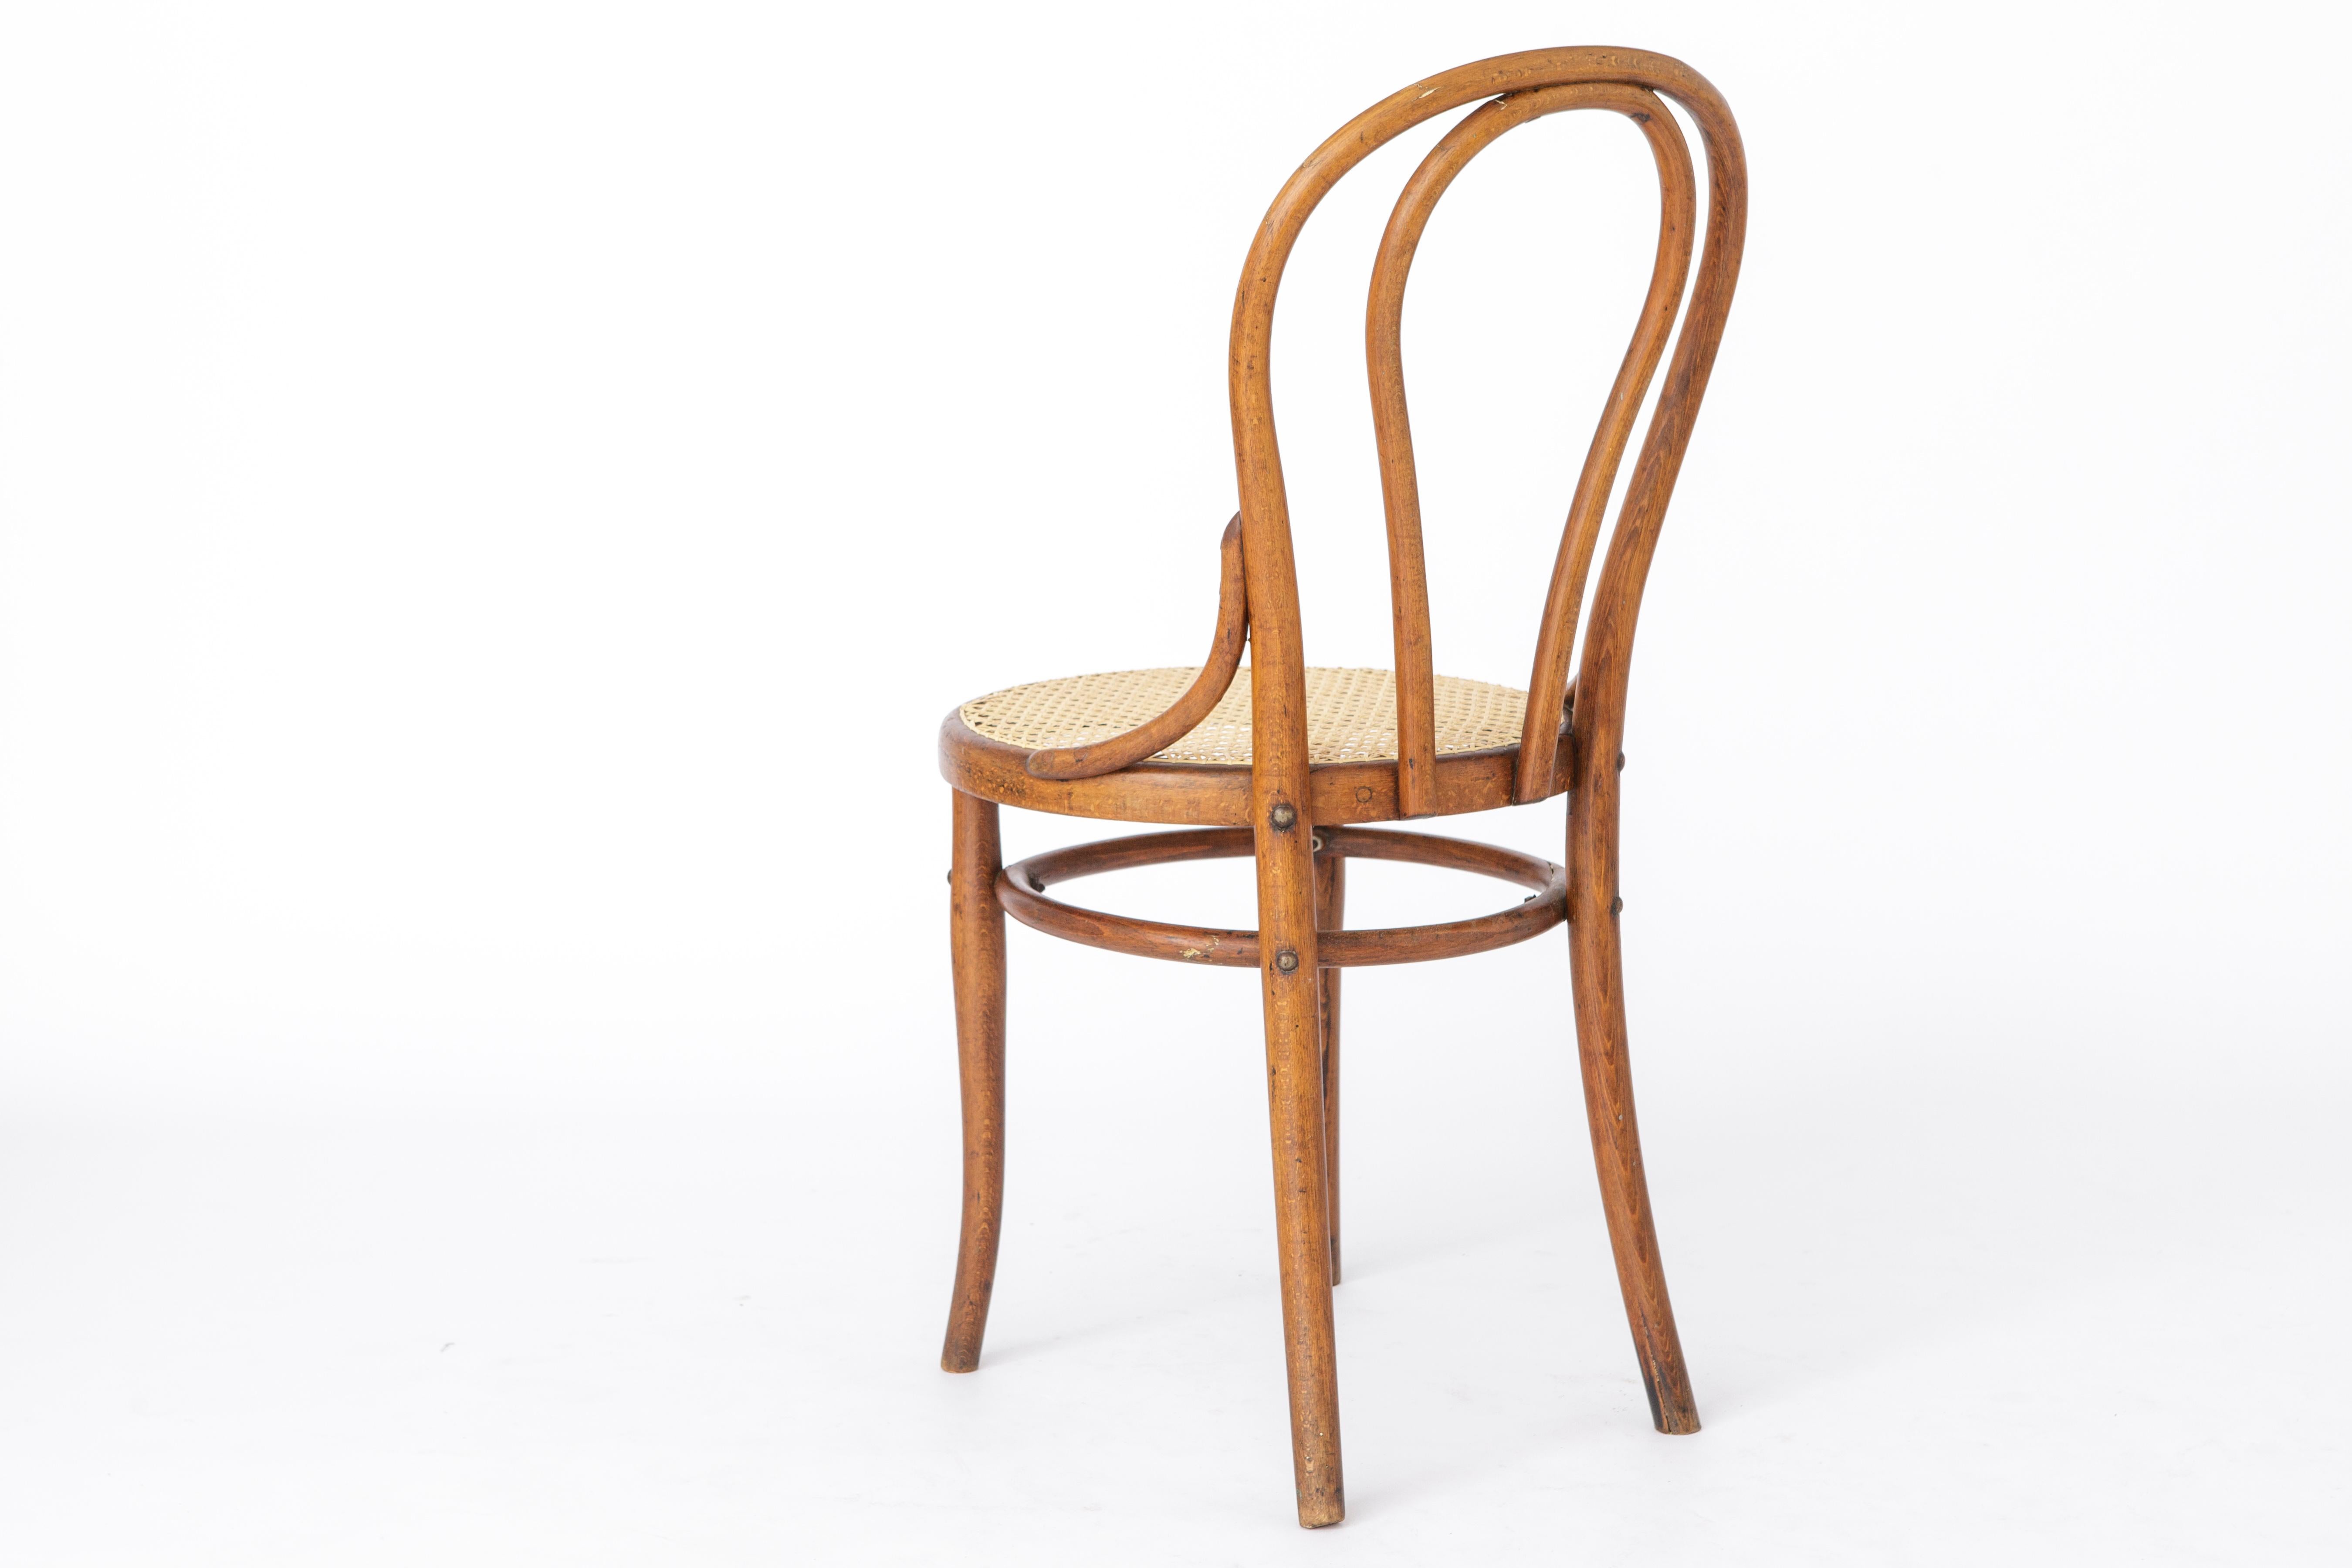 Polished Vintage Thonet Chair No. 18, approx. 1890, Viennese hand cane For Sale